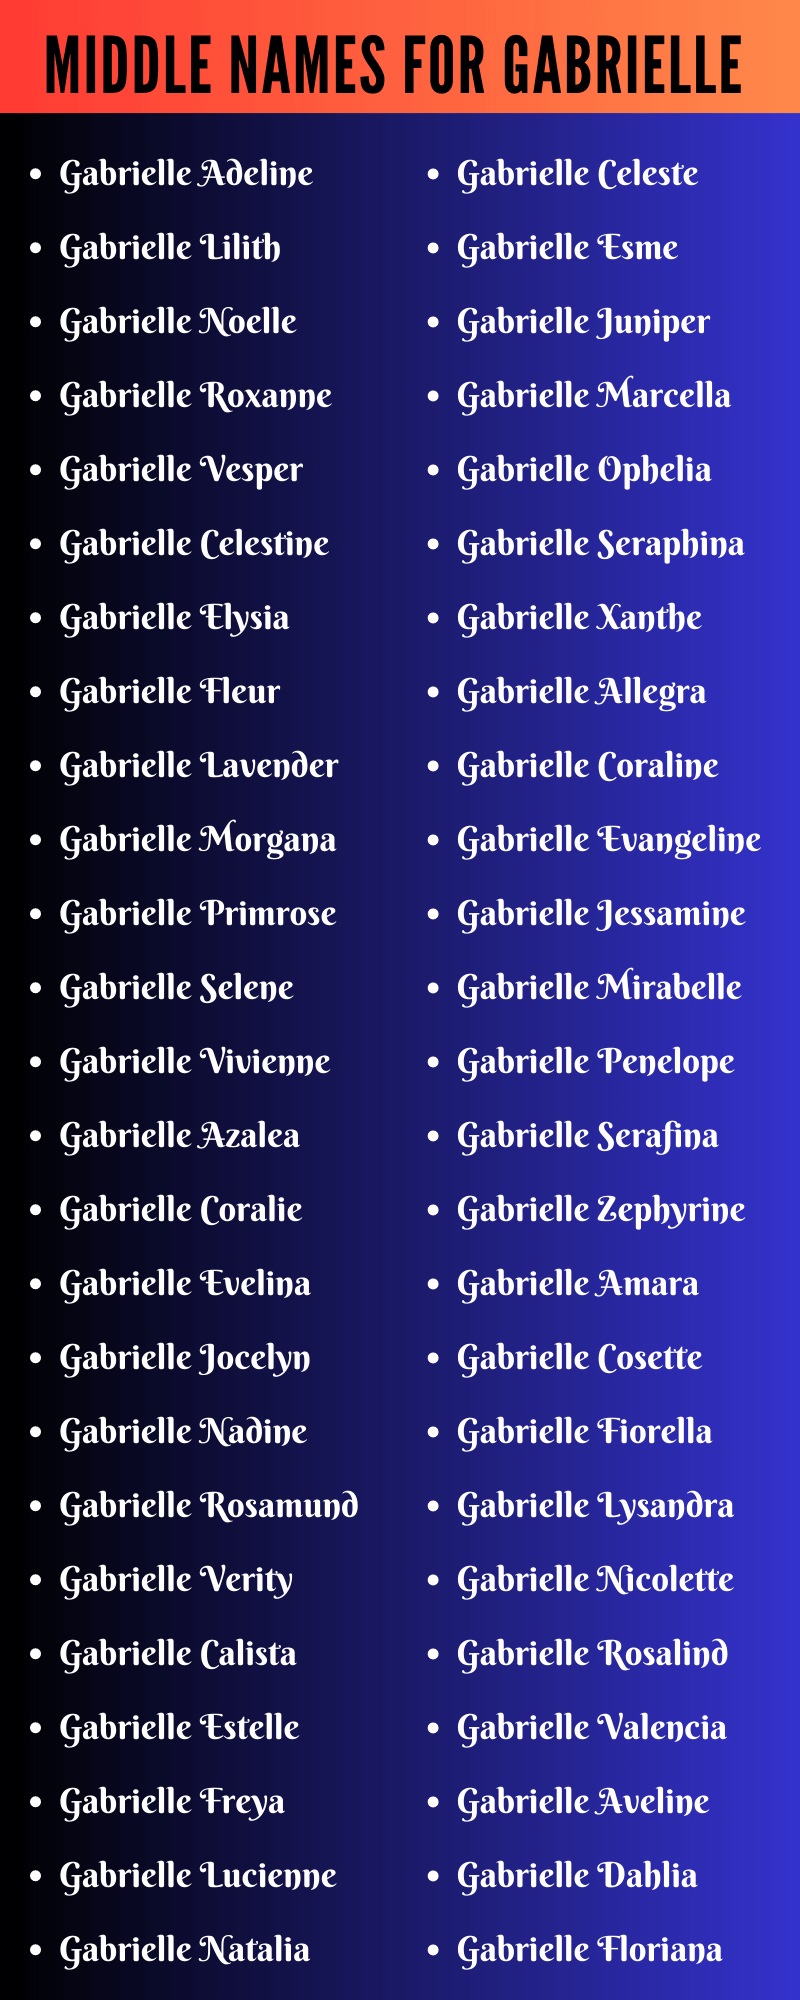 Middle Names For Gabrielle